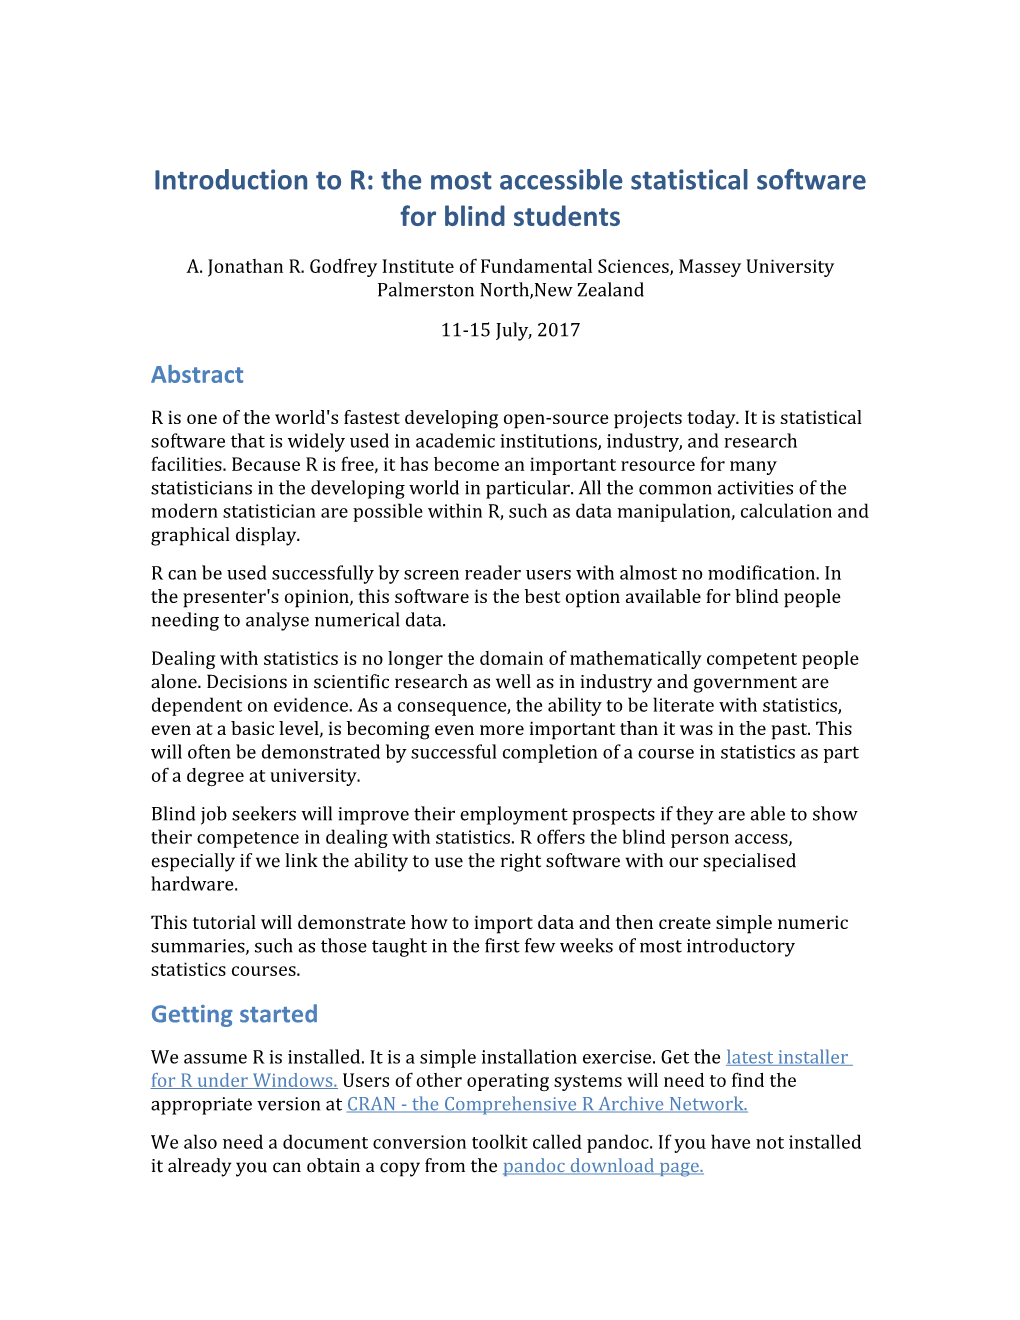 Introduction to R: the Most Accessible Statistical Software for Blind Students